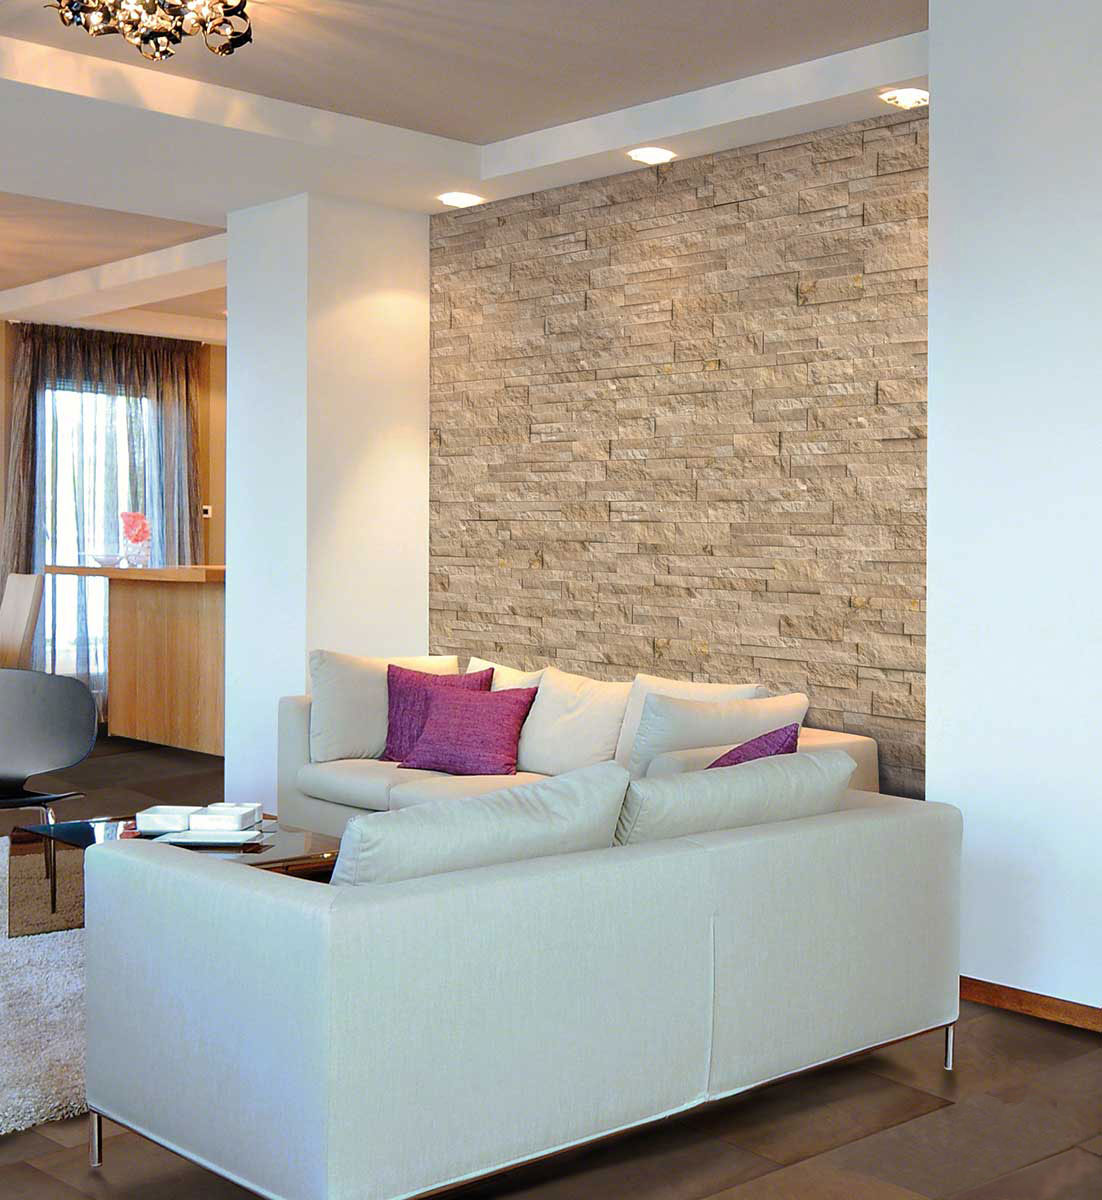 Durango Cream Stacked Stone wall in living room